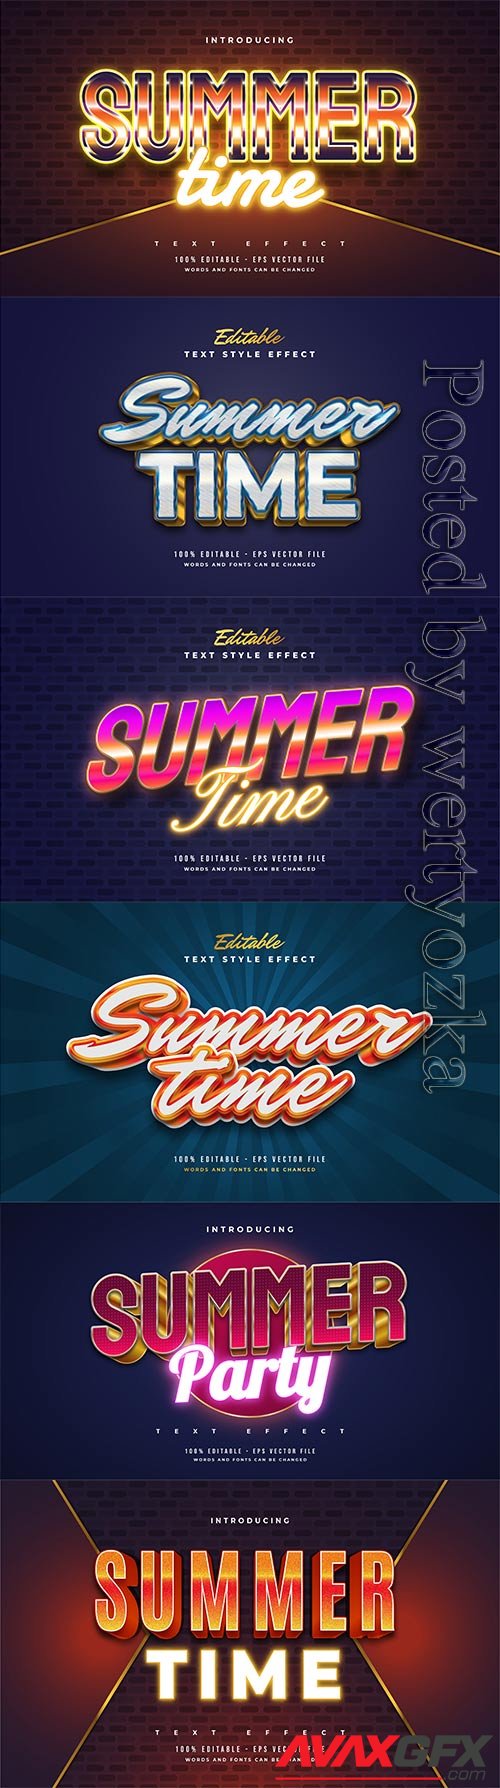 Summer time text with cartoon style editable vector text effect